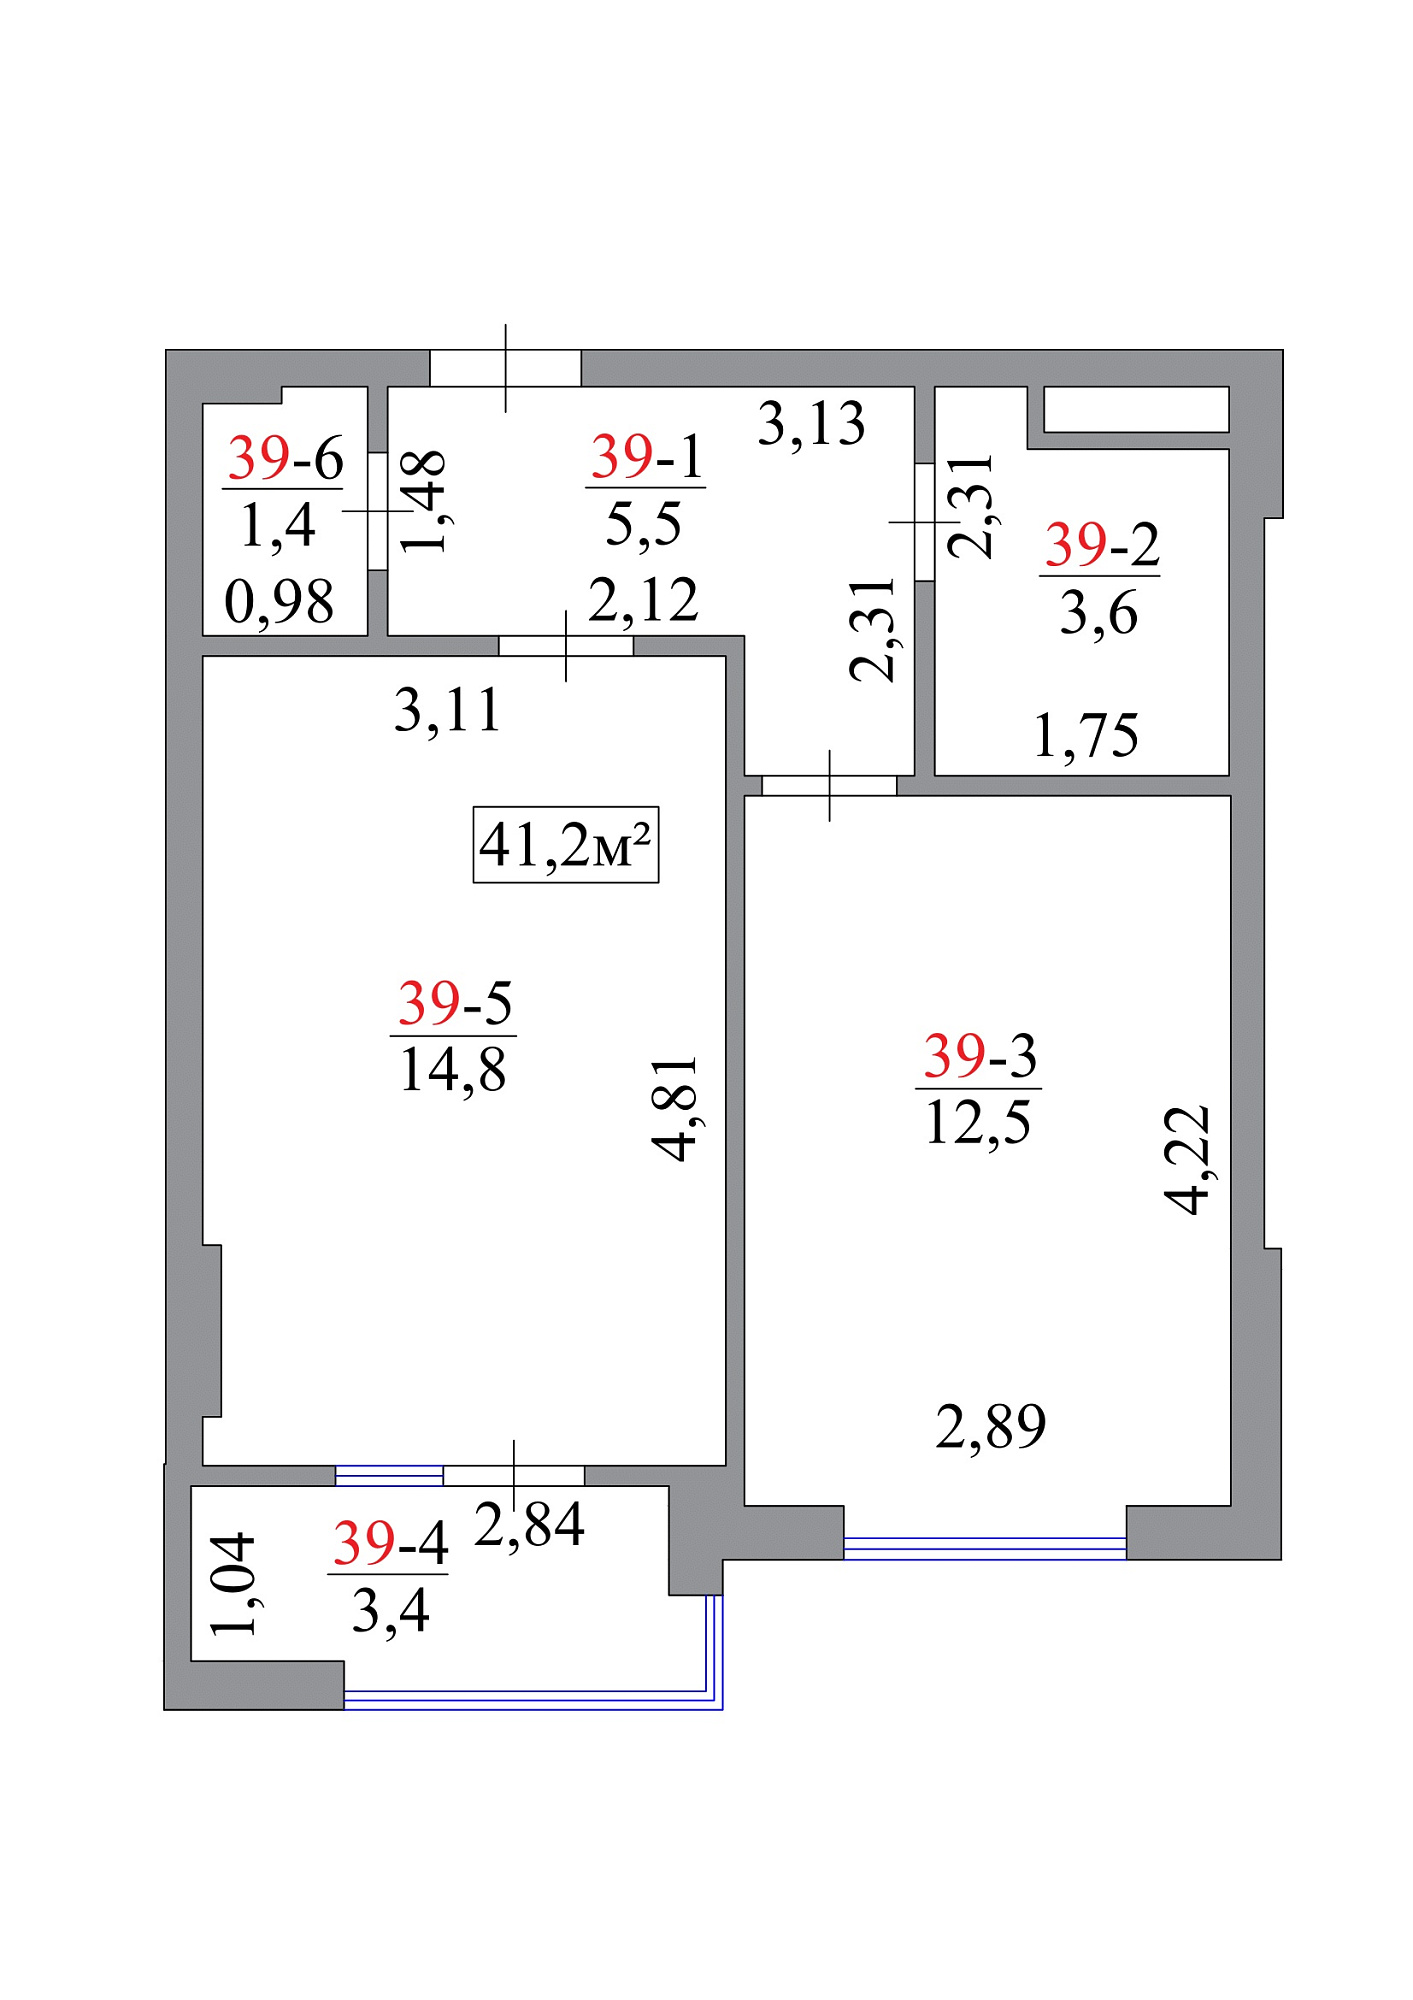 Planning 1-rm flats area 41.2m2, AB-07-04/00035.